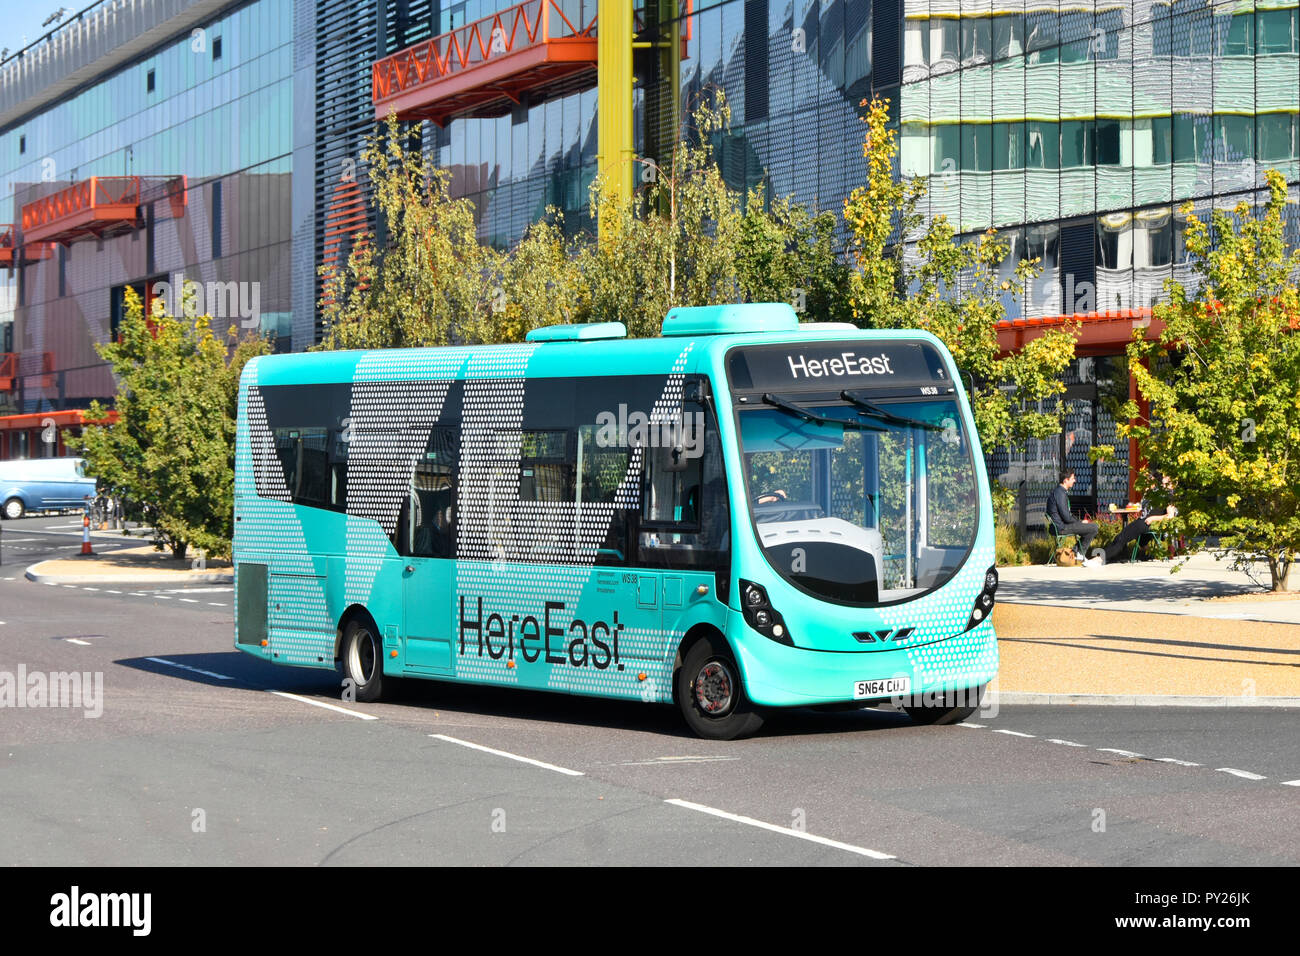 HereEast Hackney Wick public transport bus connects Here East modern innovation centre & technology park to Stratford train & bus station London UK Stock Photo